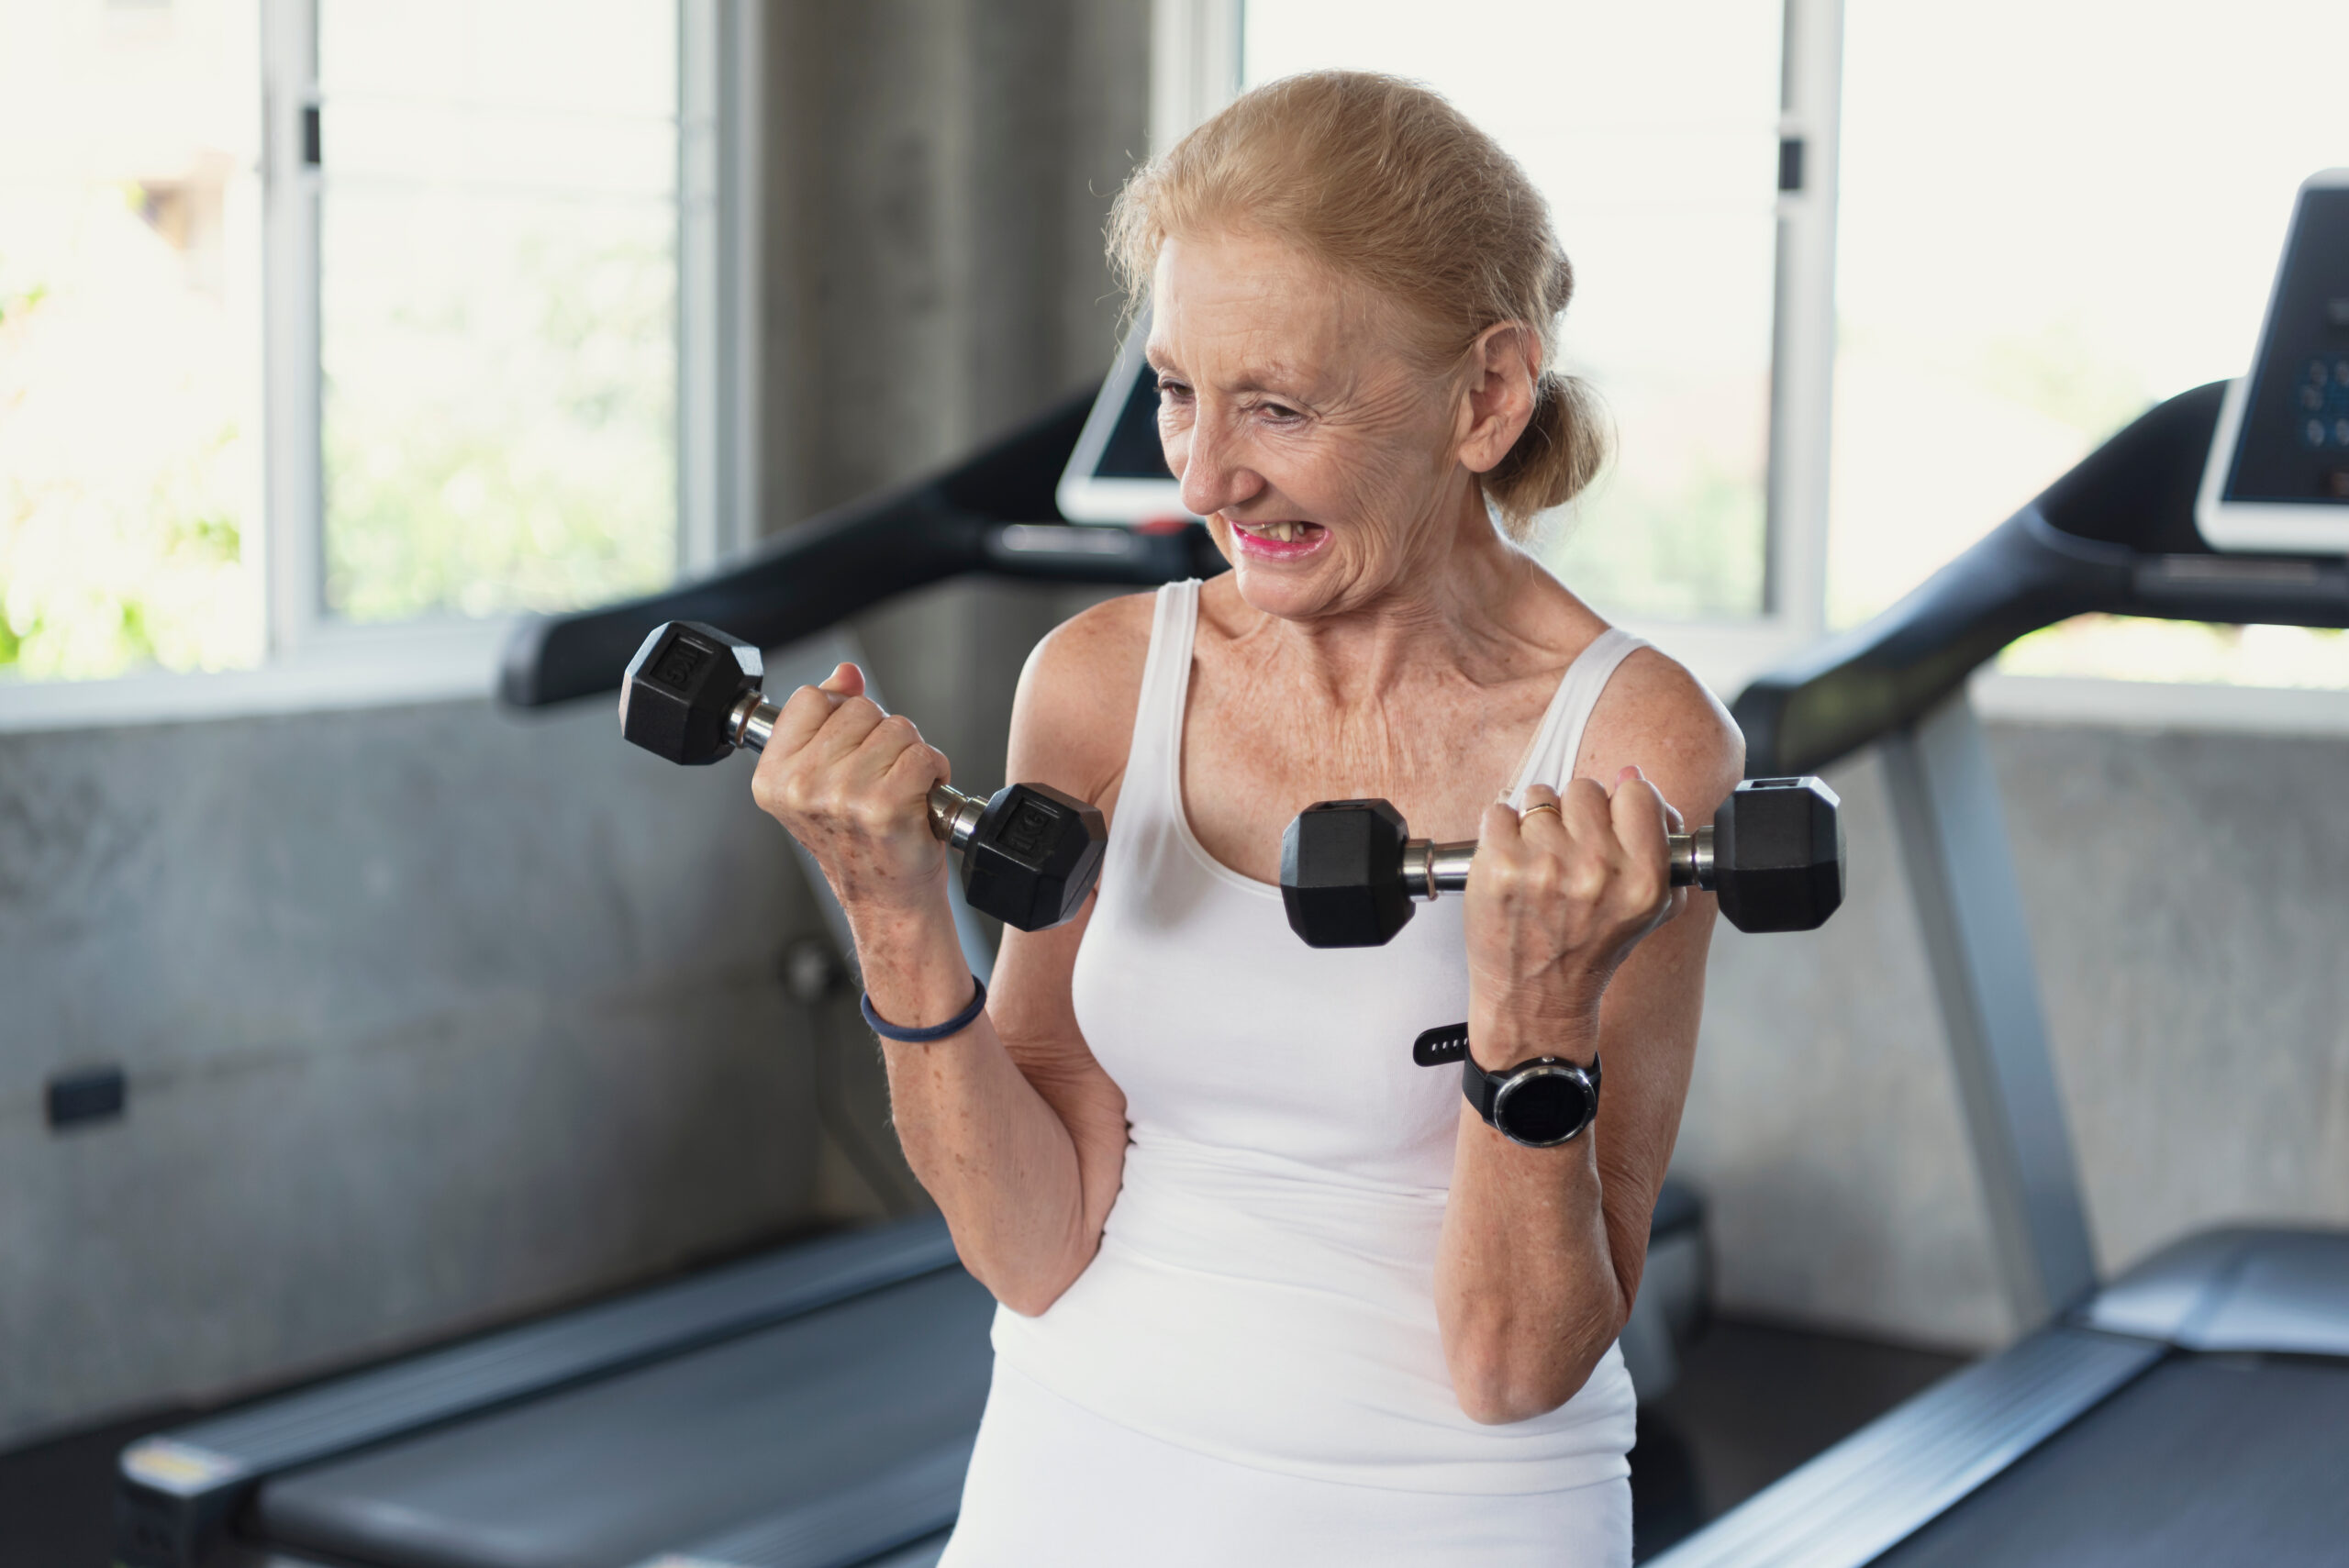 Is Physical Activity Good for Dementia and Alzheimer’s?